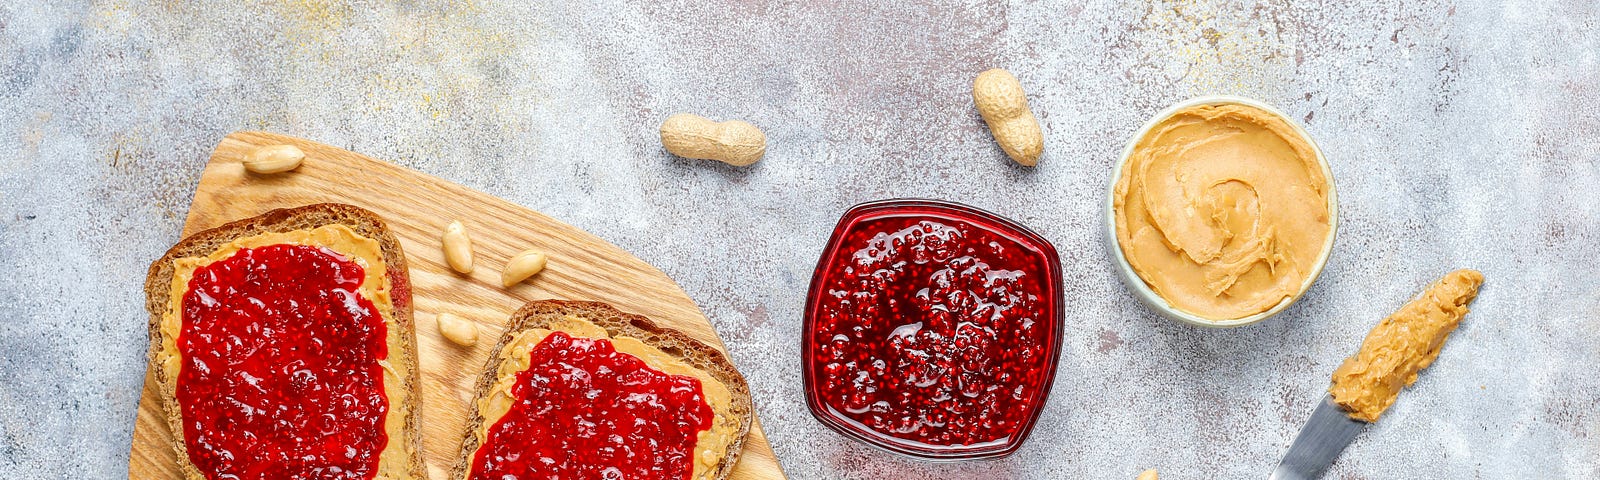 deconstructed pb&j sandwich on a cutting board next to jars of peanut butter and jelly